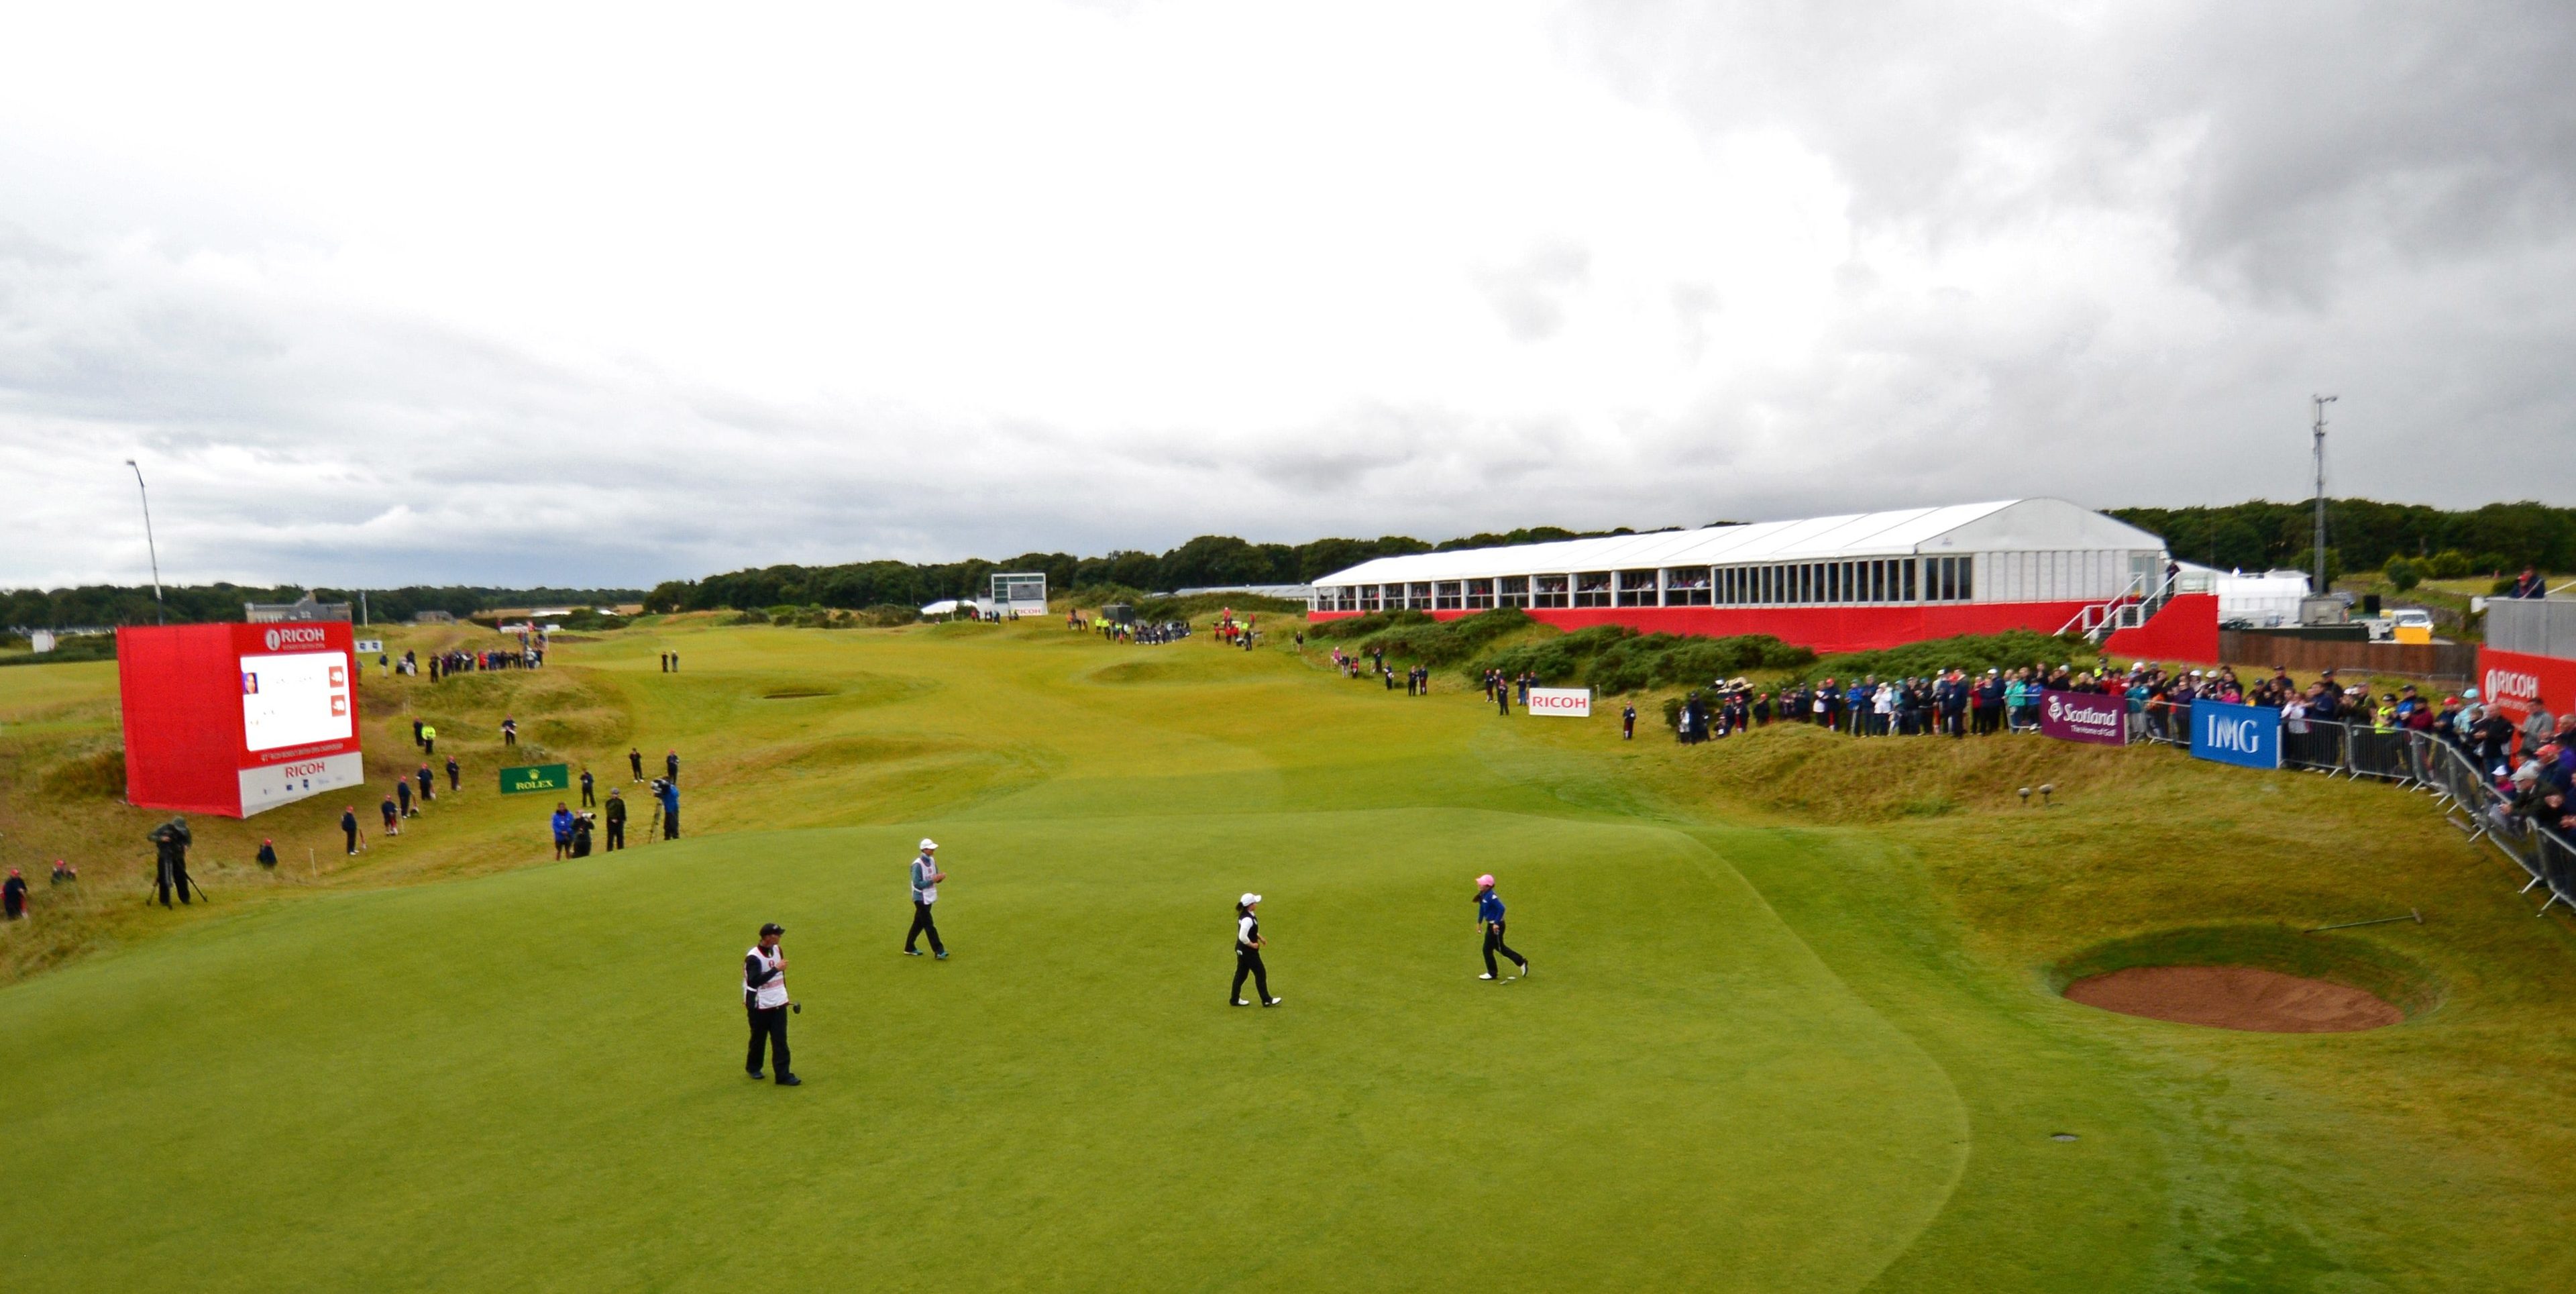 The theft occurred during the Women's British Open earlier this month.